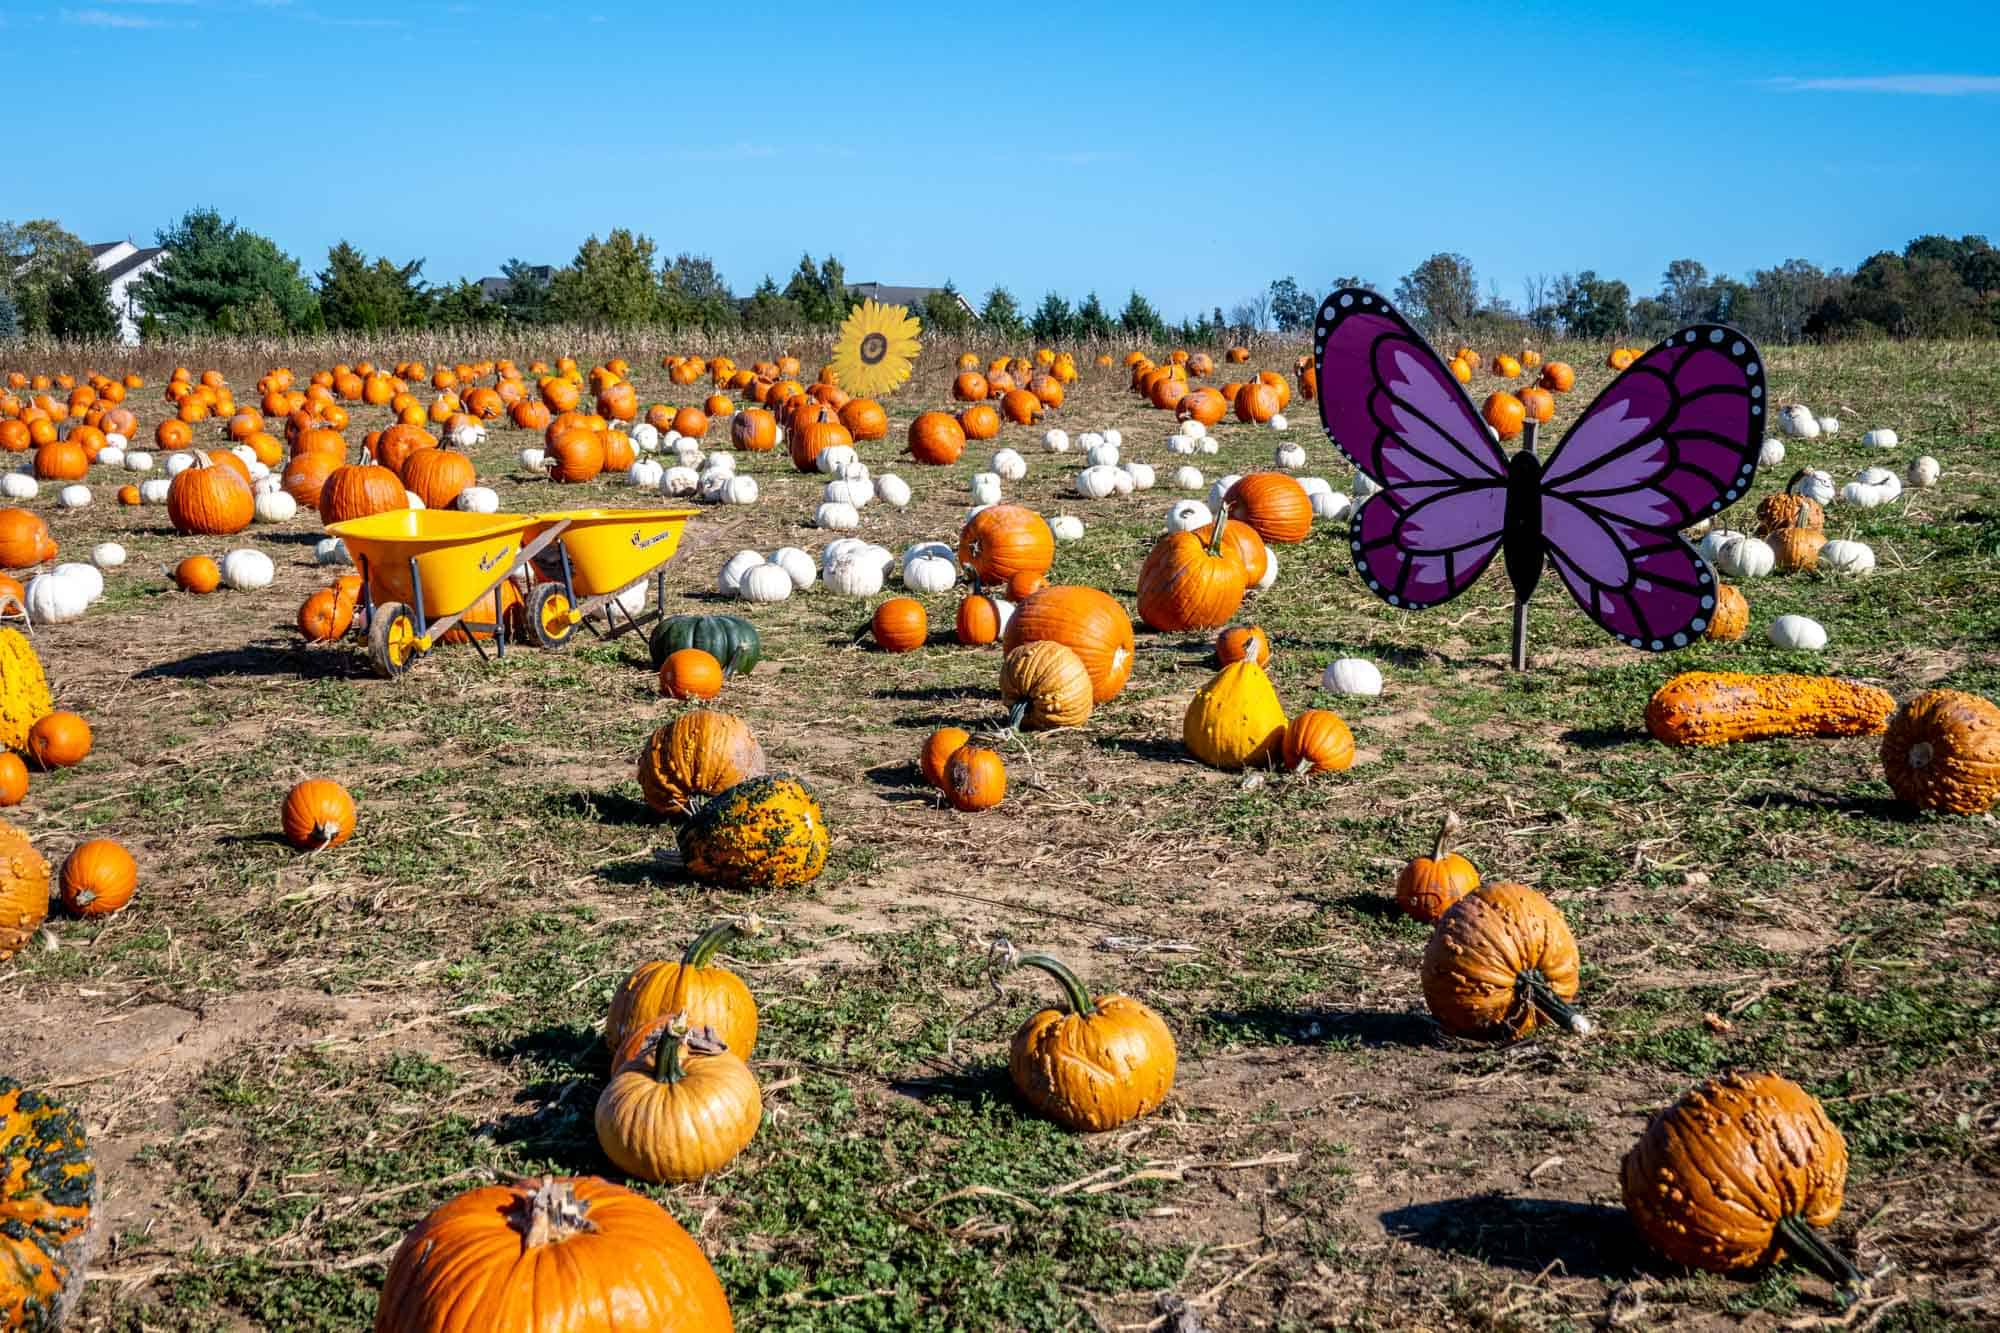 Pumpkins in a pumpkin patch with wheelbarrows and butterfly and sunflower decorations